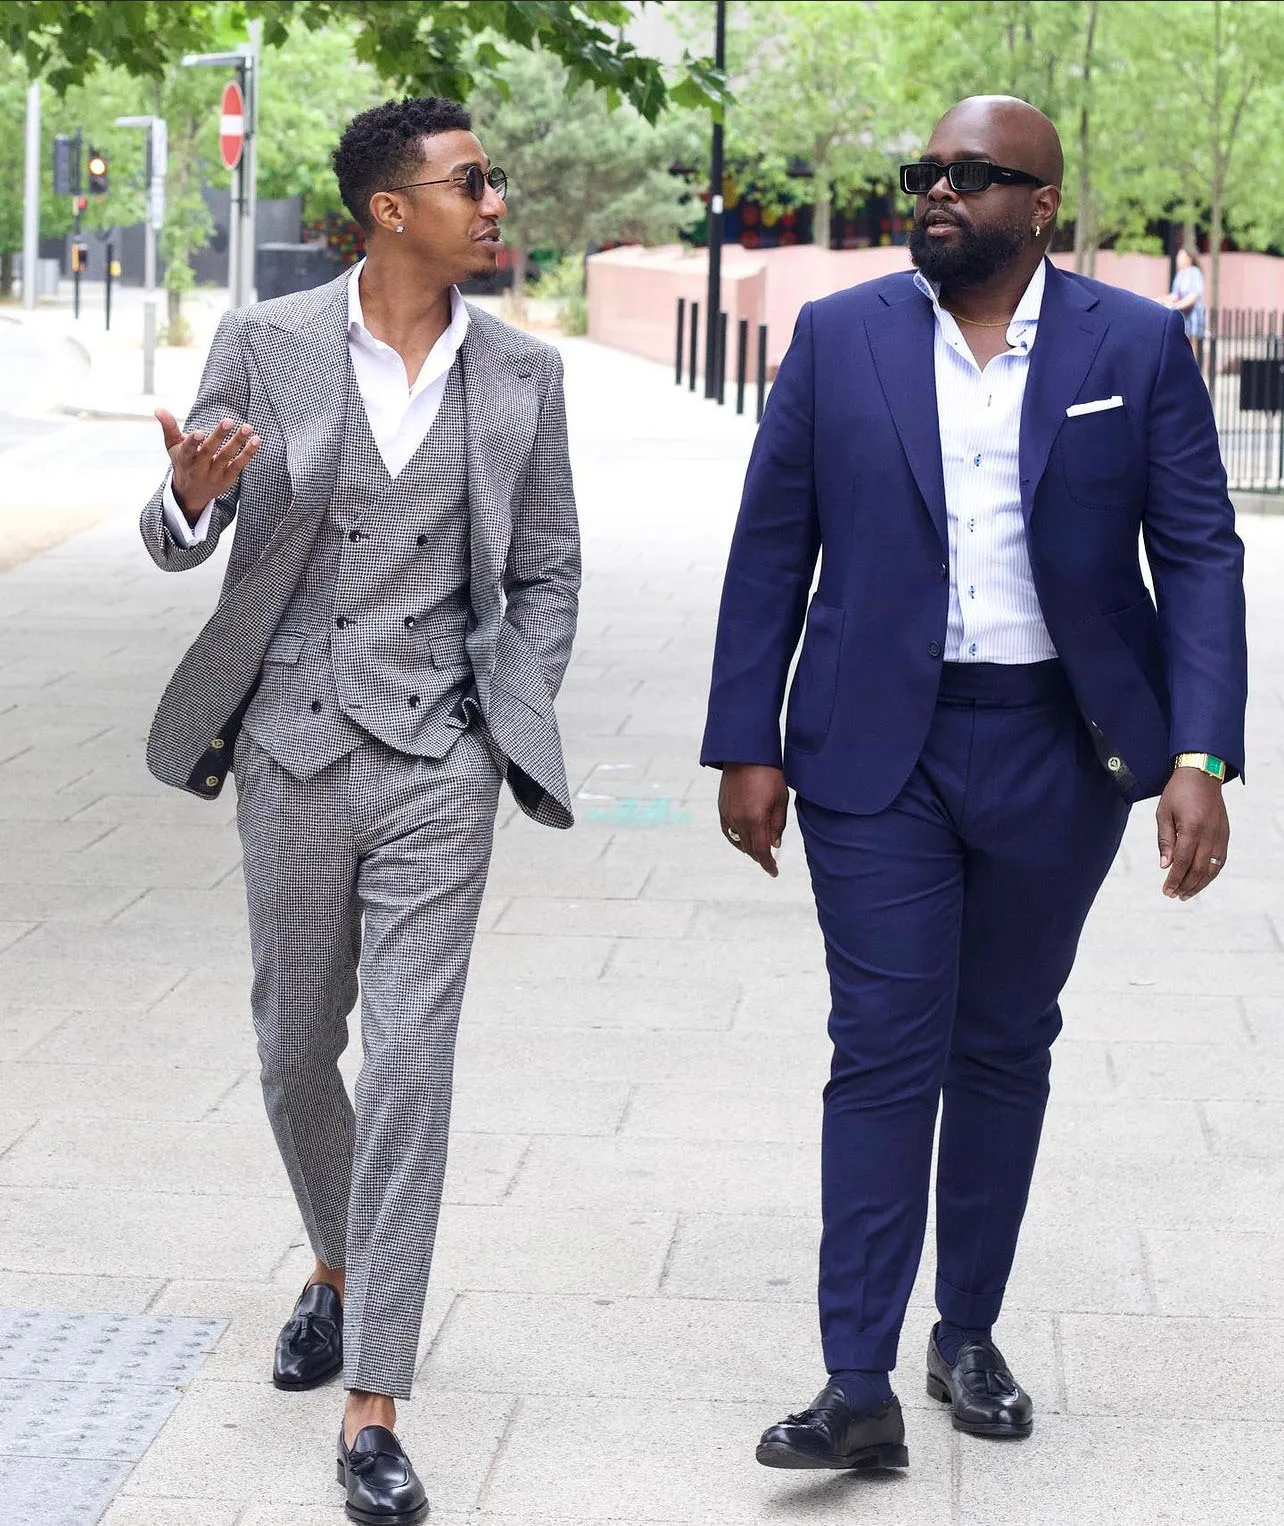 Two men walking and talking while wearing Reveal Suits